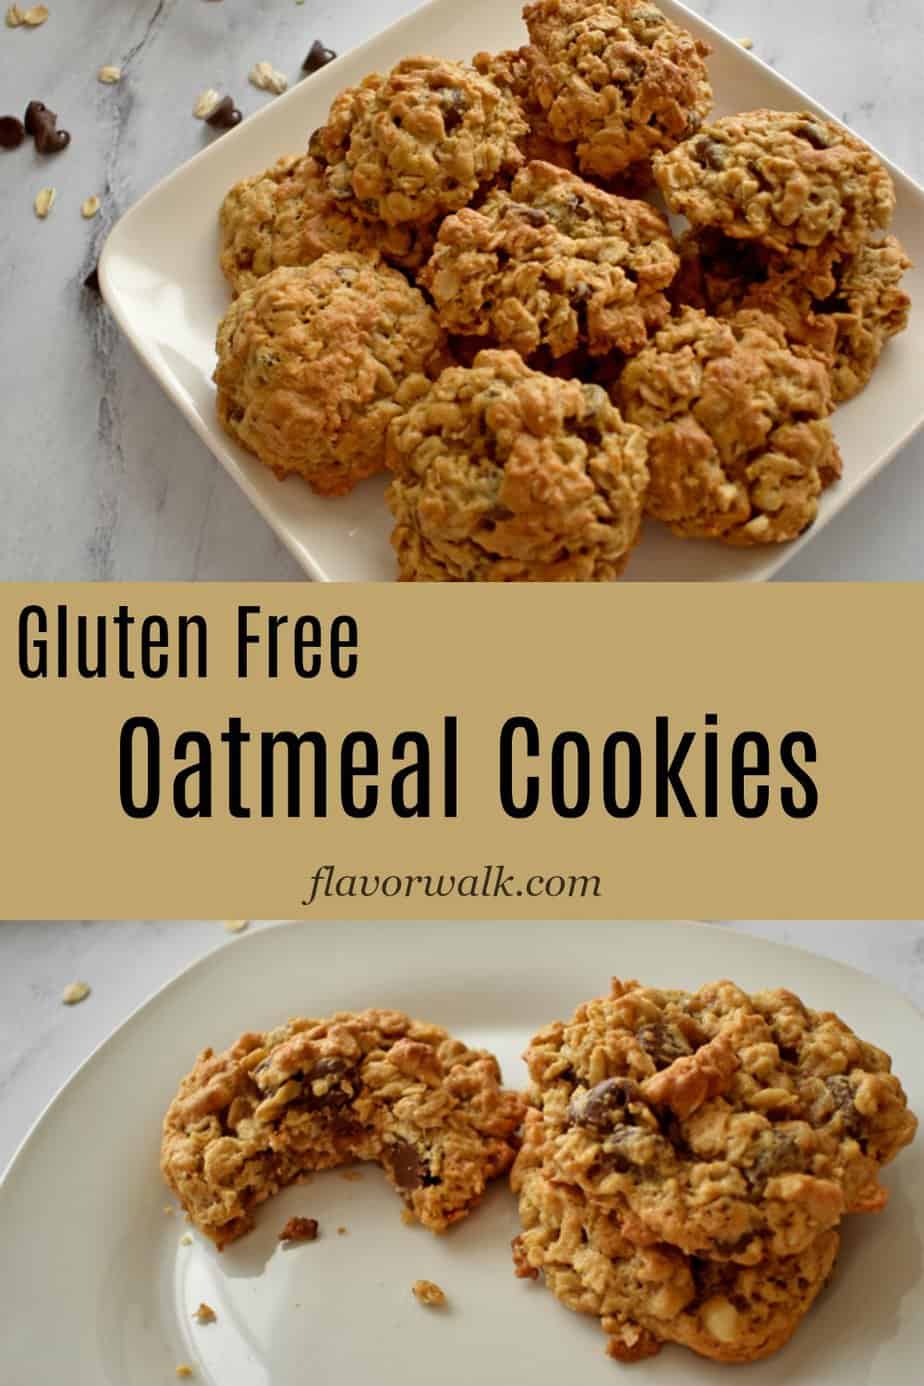 Top image is a stack of gluten free oatmeal cookies on a square white plate, middle image is a text overlay, and bottom image is three gluten free oatmeal cookies on a white plate.